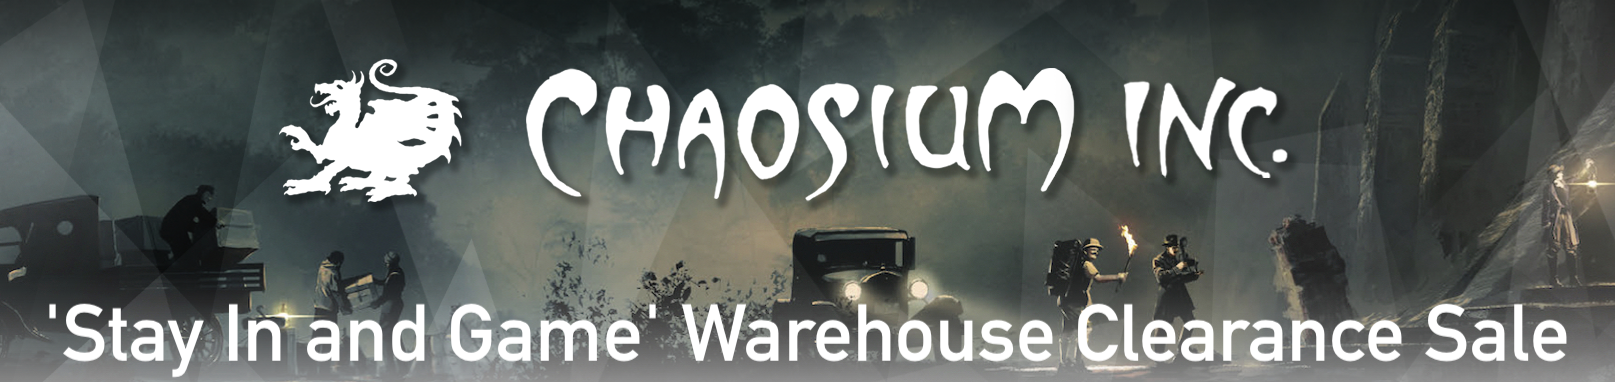 stay-in-and-game-warehouse-clearance-sal